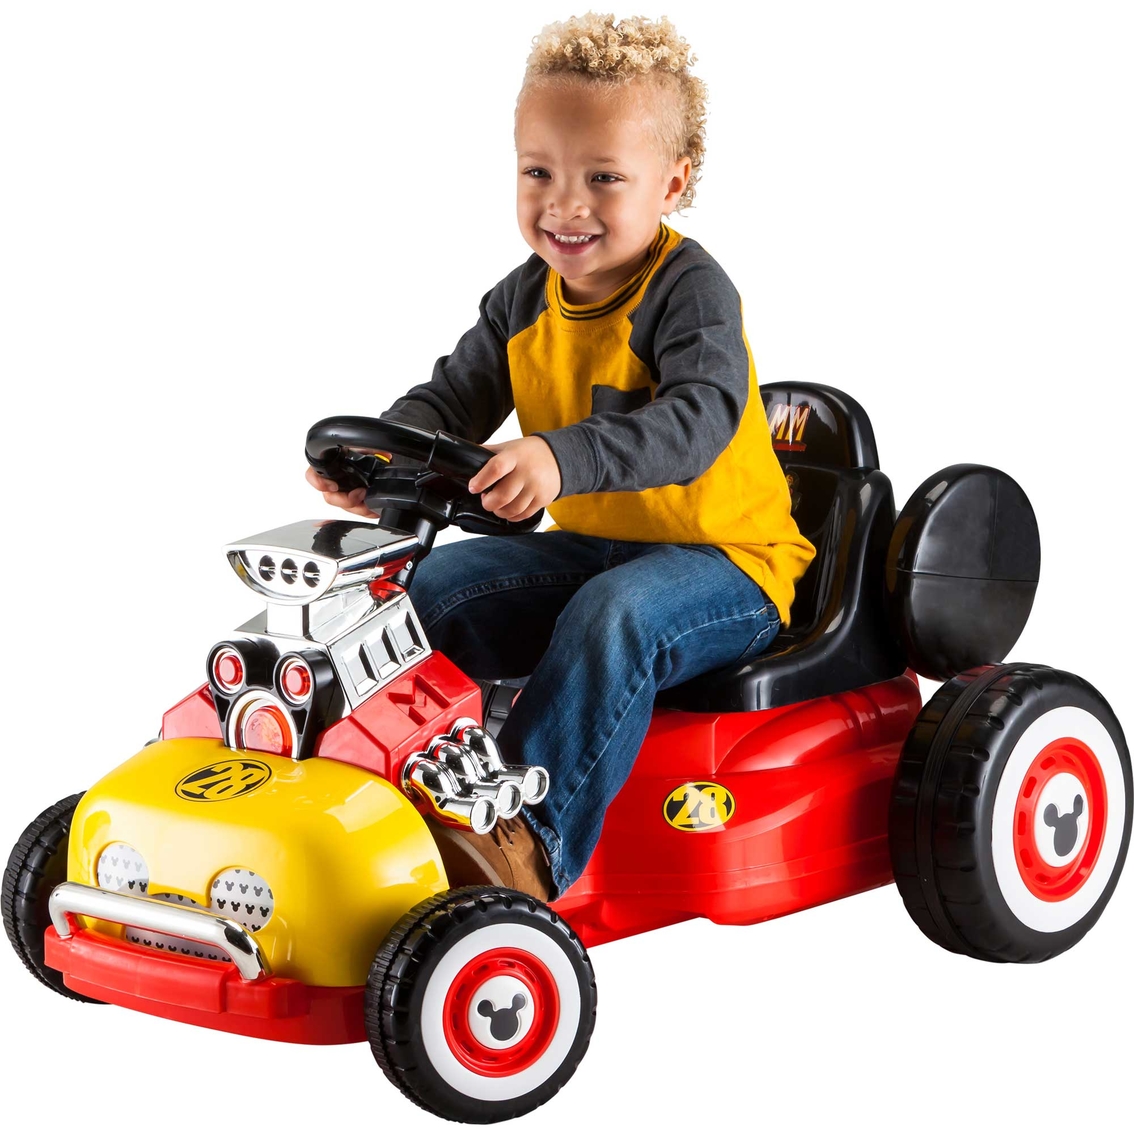 👦🚗Voiture Mickey 6V Hot Rod Ride On 800010941 Feber 100 x 68 x 53 cm👧🚕  — BRYCUS